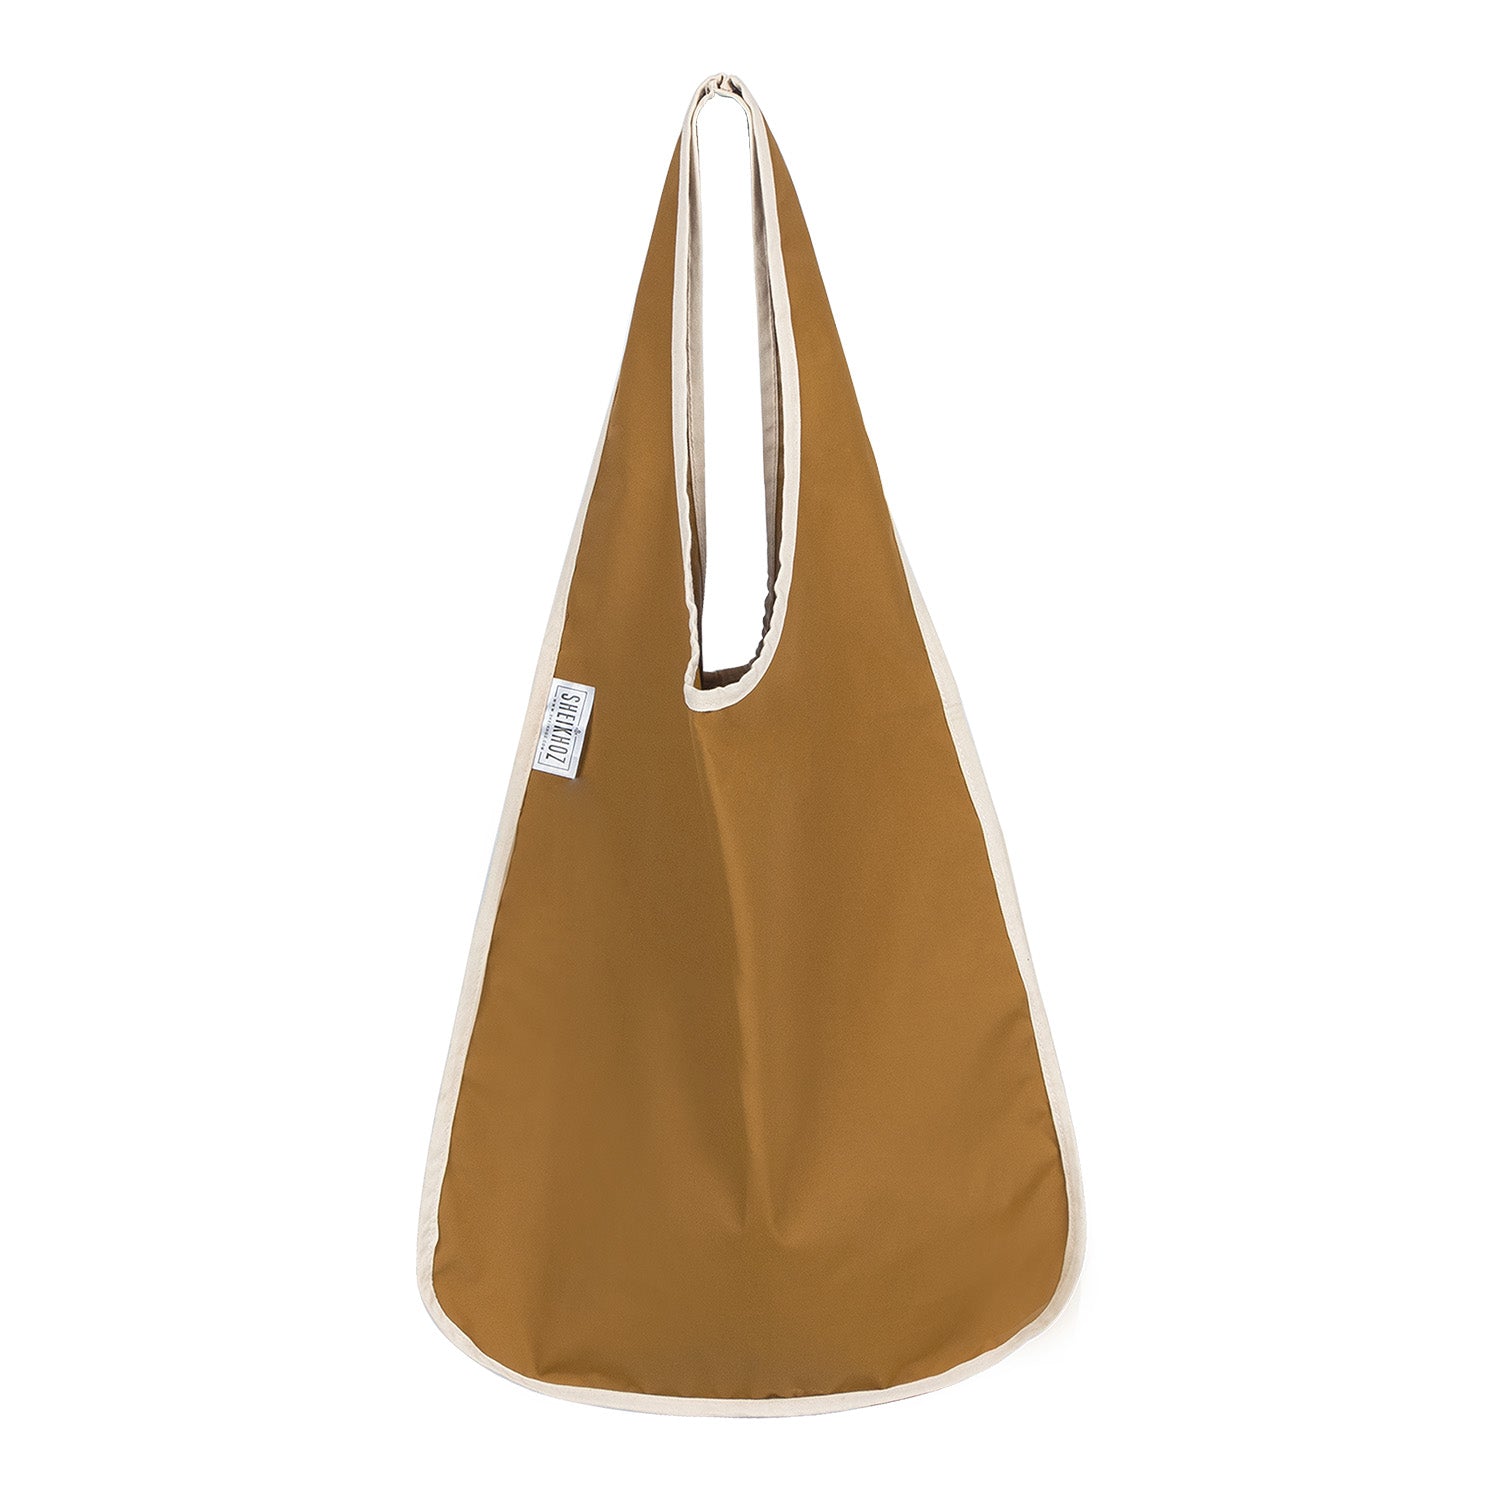 Pop Tote - Caramel Tote with Piping